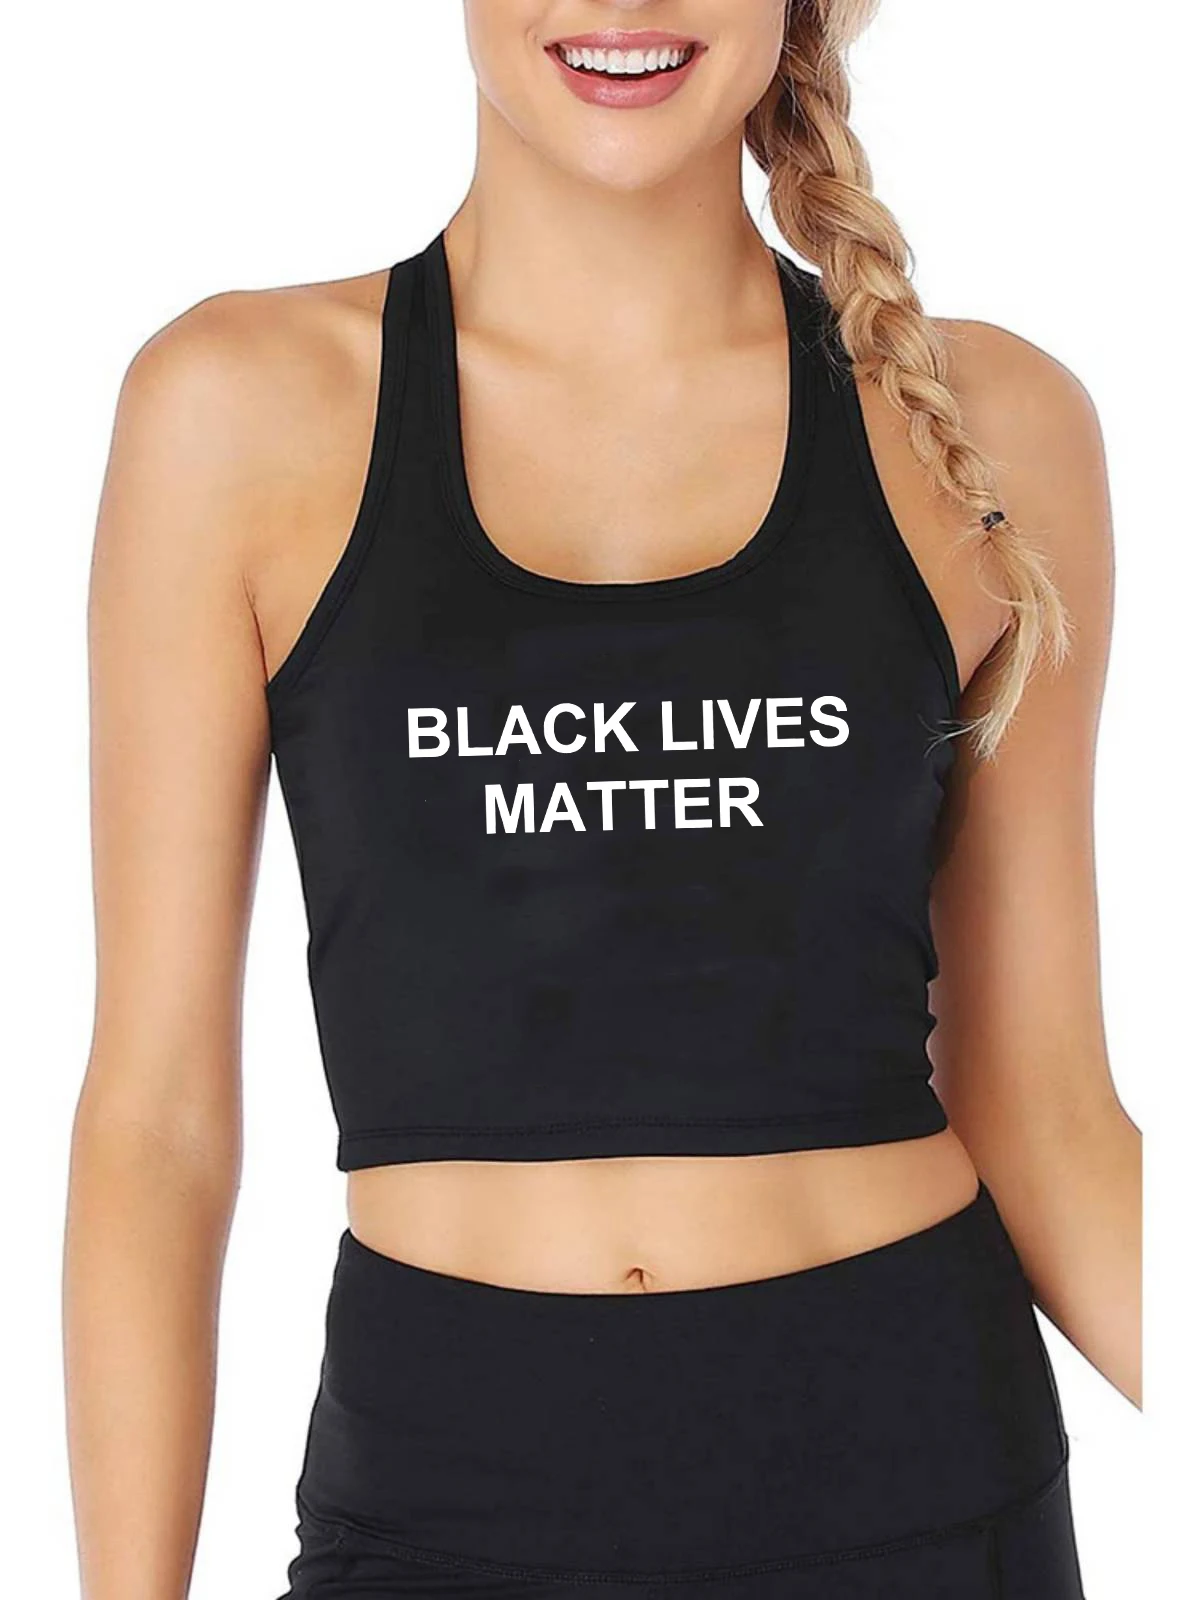 Black Lives Matter text design sexy crop top women's customizable street  creative tank tops peace and equality camisole - AliExpress